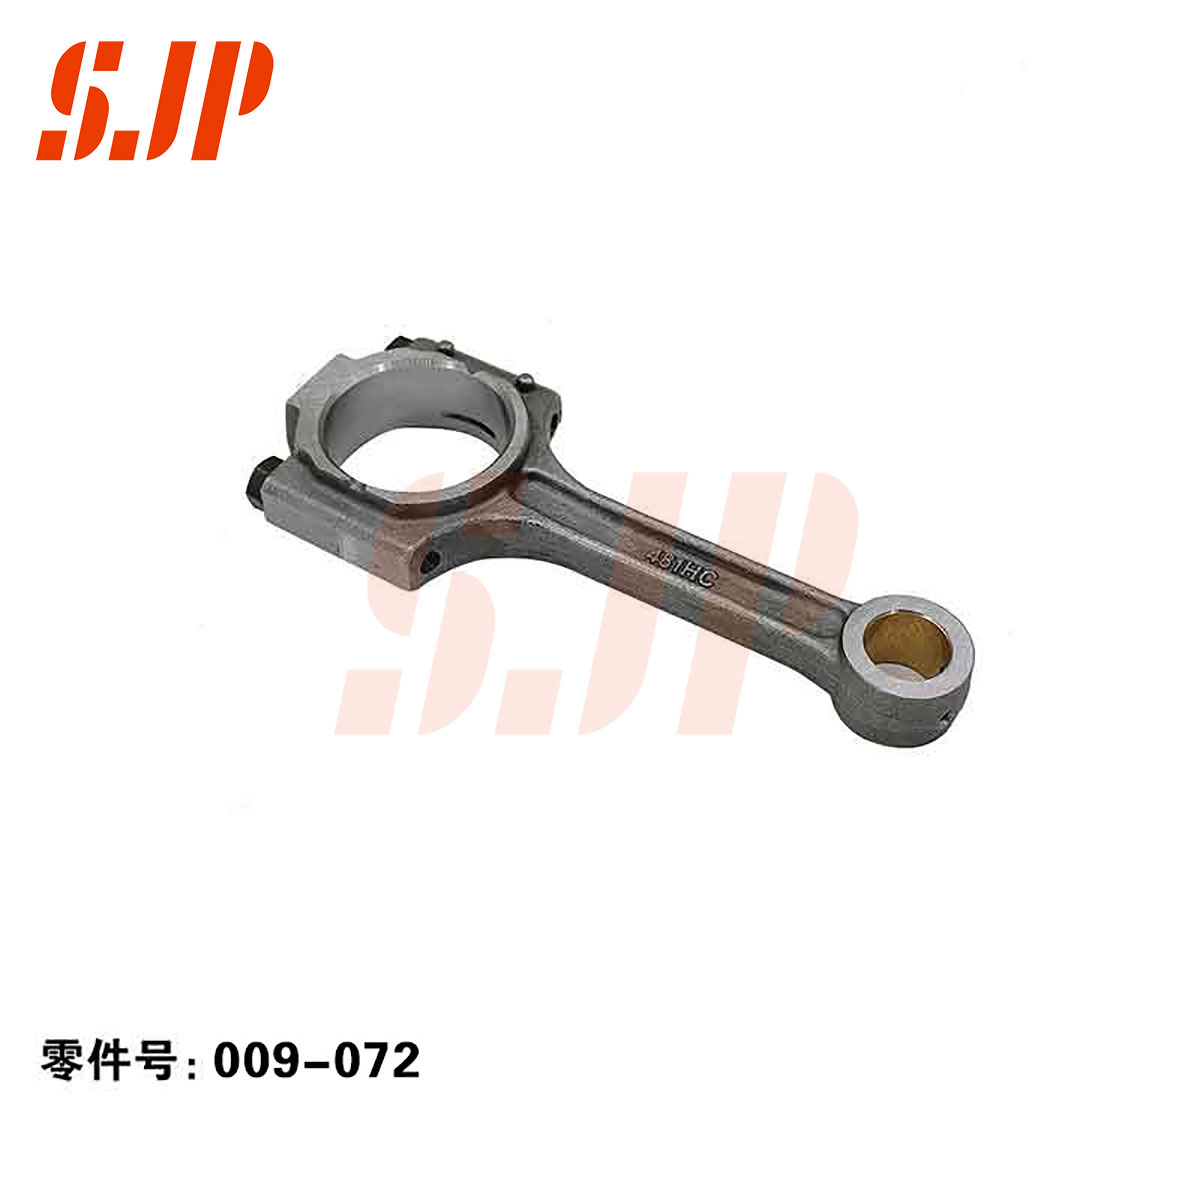 SJ-009-072 Connecting Rod For Chery 484/481/With Copper Sleeve